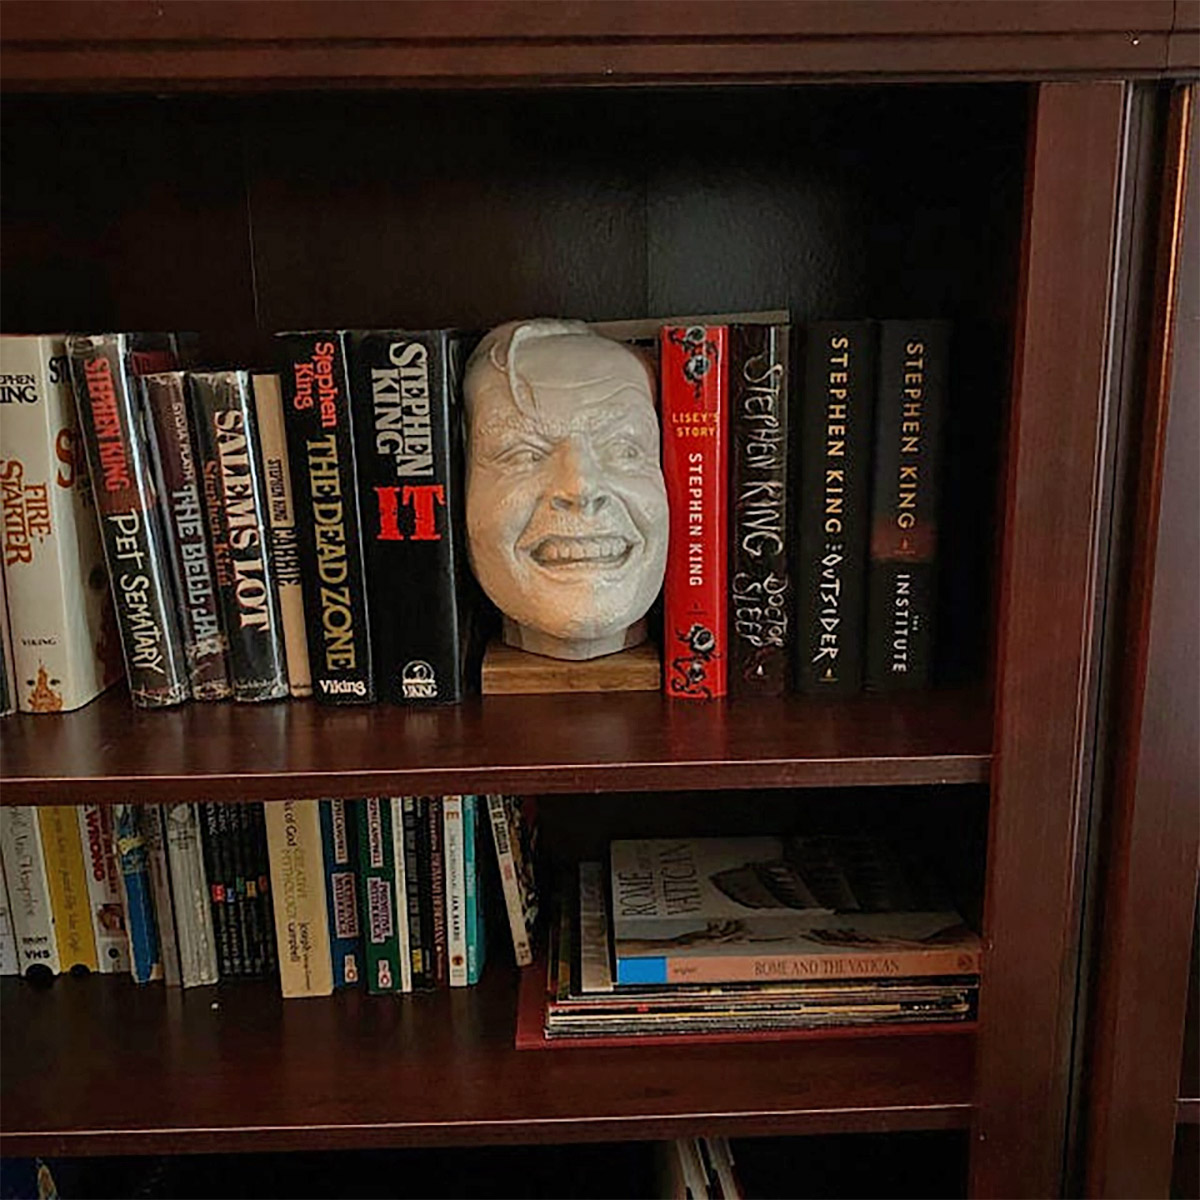 White ceramic 'The Shining' Bookend between a tuft of books on a dark brown wooden bookshelf